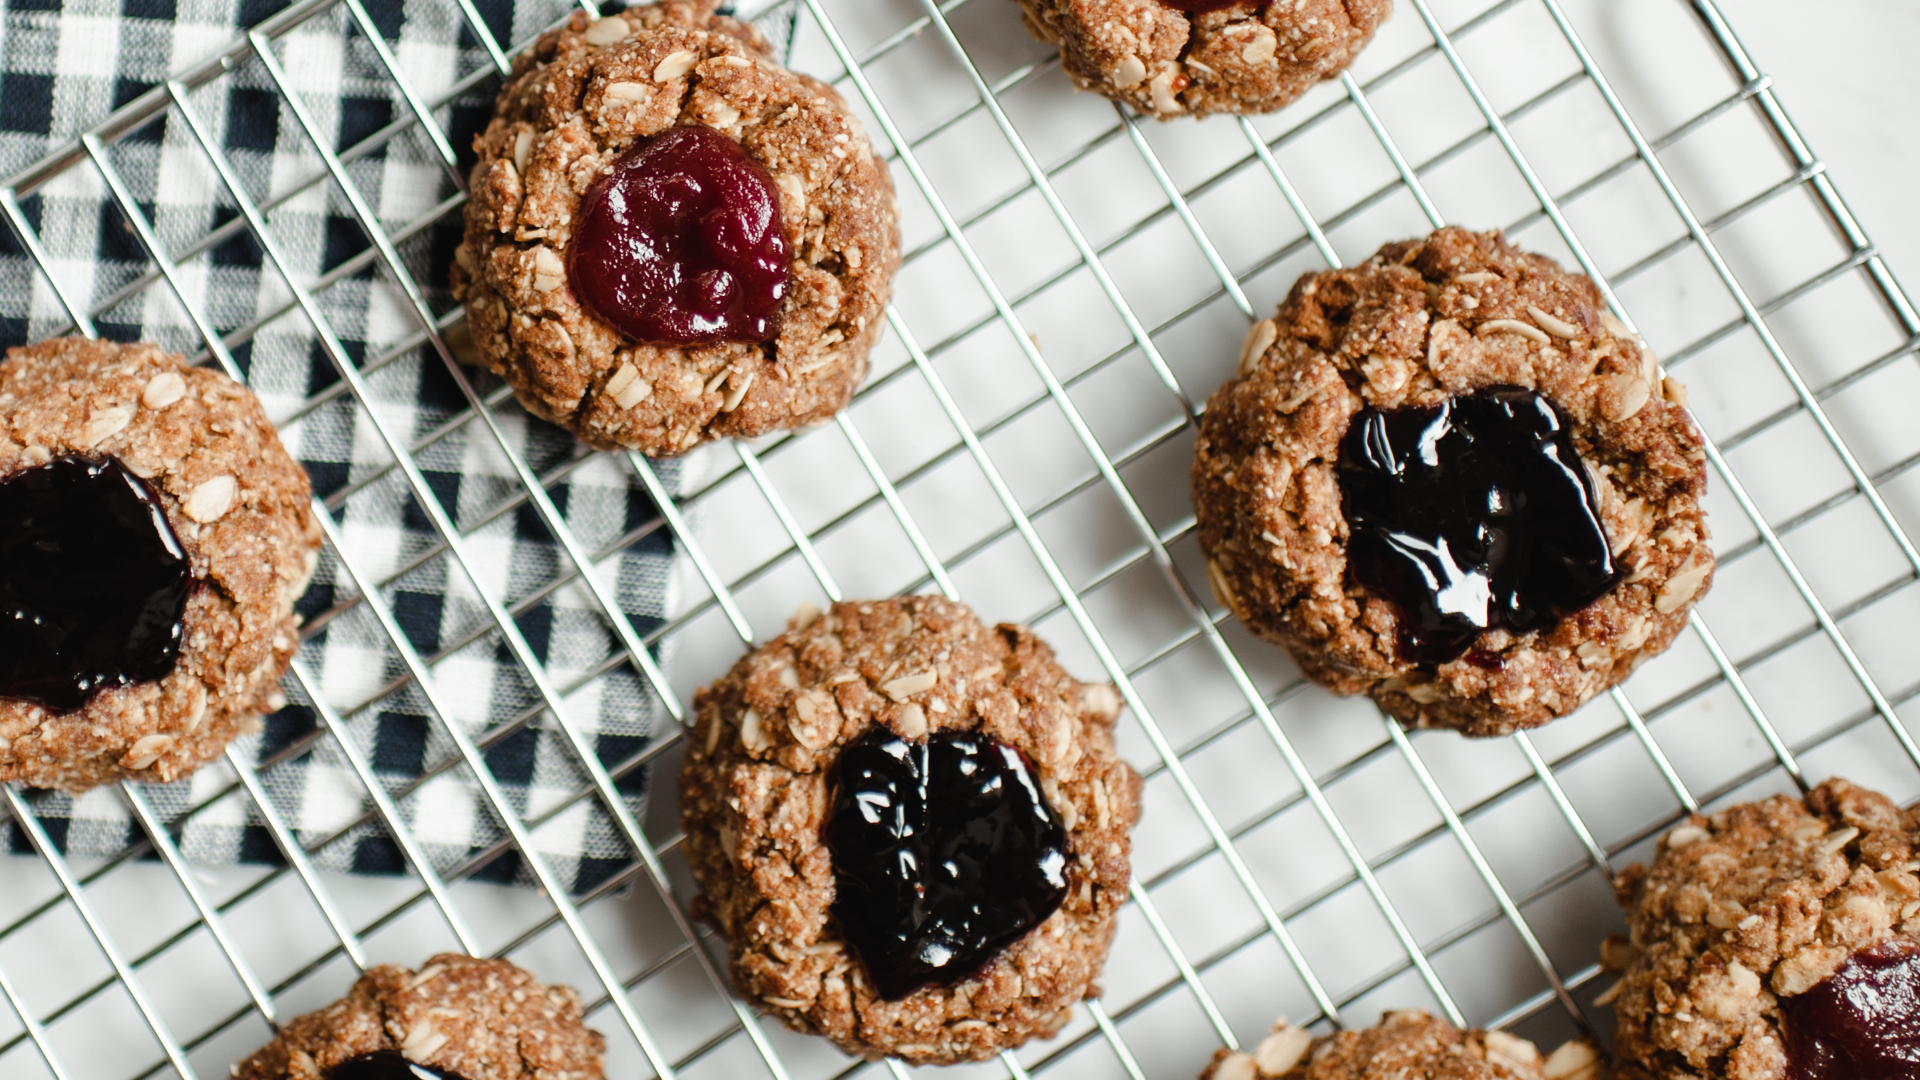 Nutrition Coach Sarah Adler shares her favorite healthy holiday treat - a nutritious twist on thumbprint cookies. Sponsored by 425 Magazine.